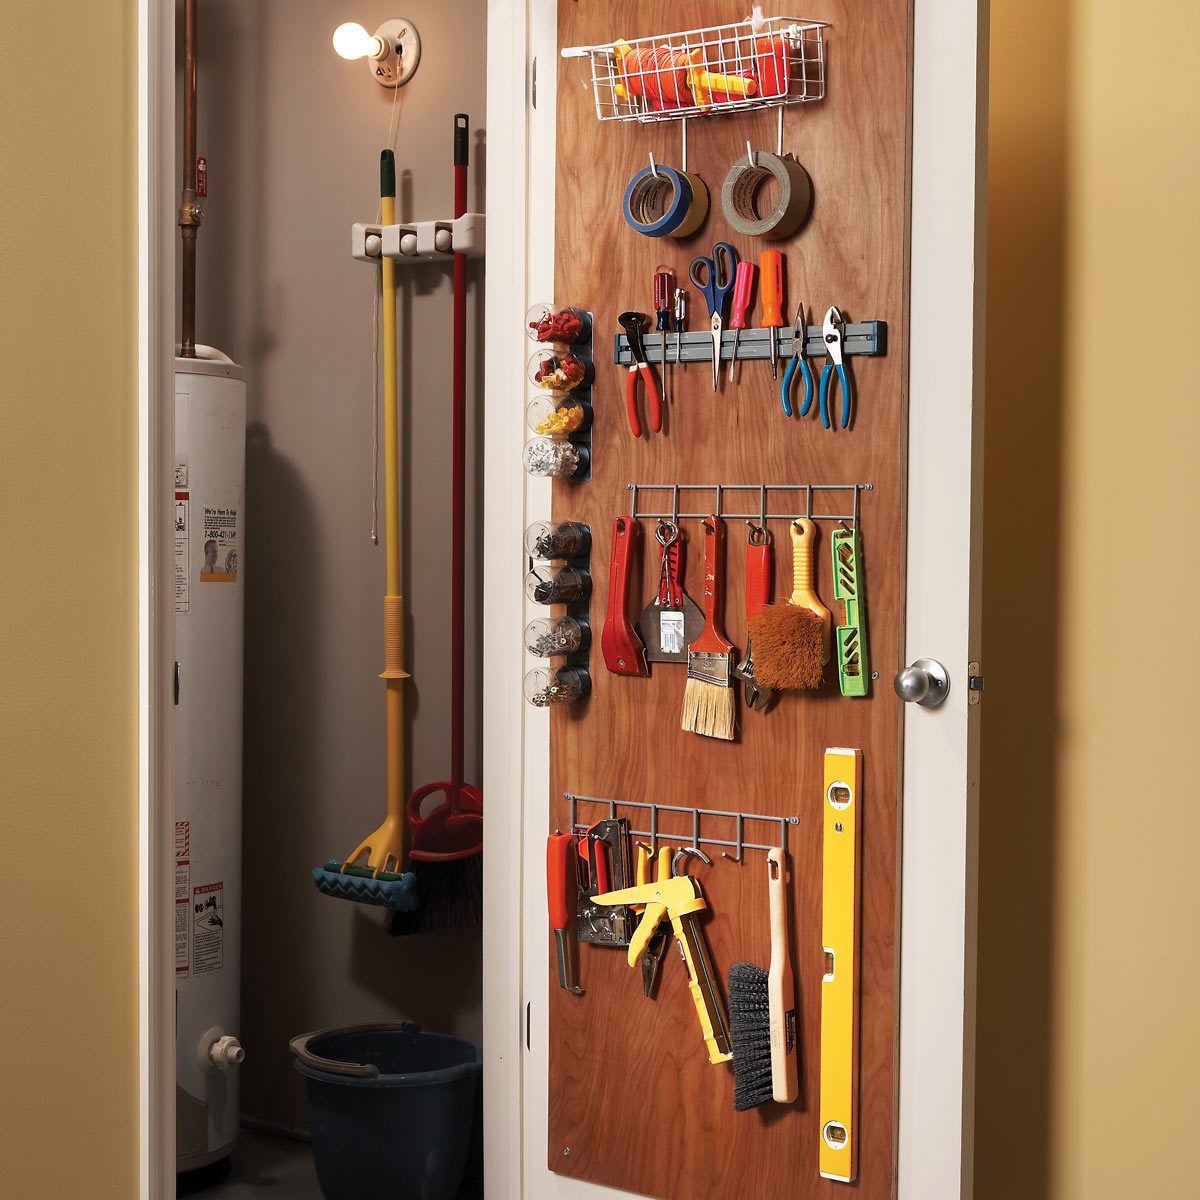 12 Simple Storage Solutions For Small Spaces The Family Handyman